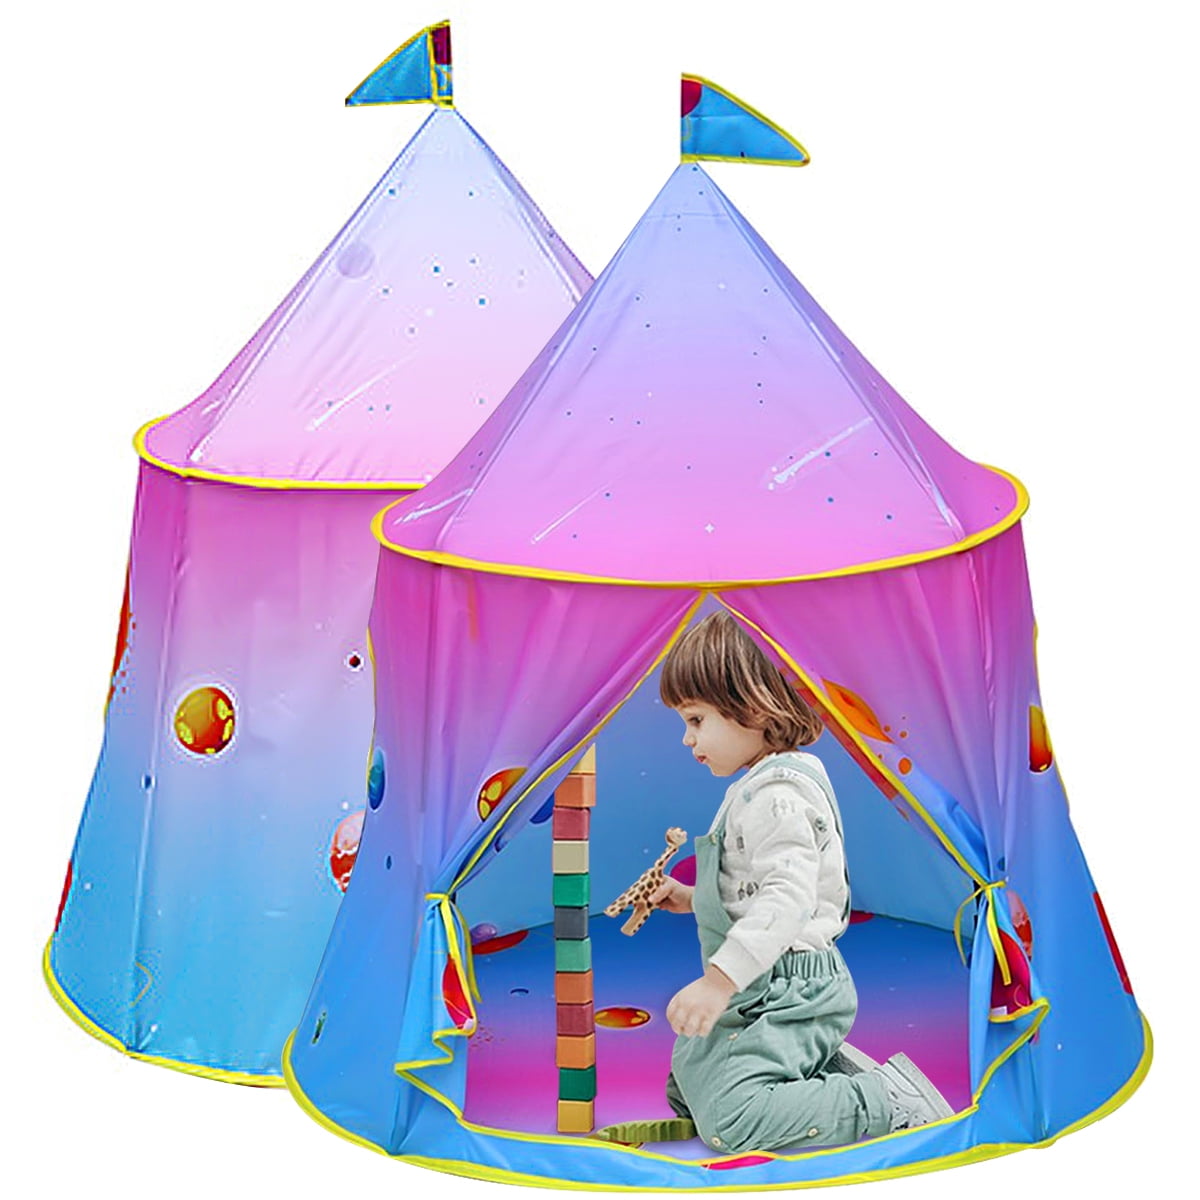 Tent toy house indoor and outdoor baby folding outdoor camping game house 